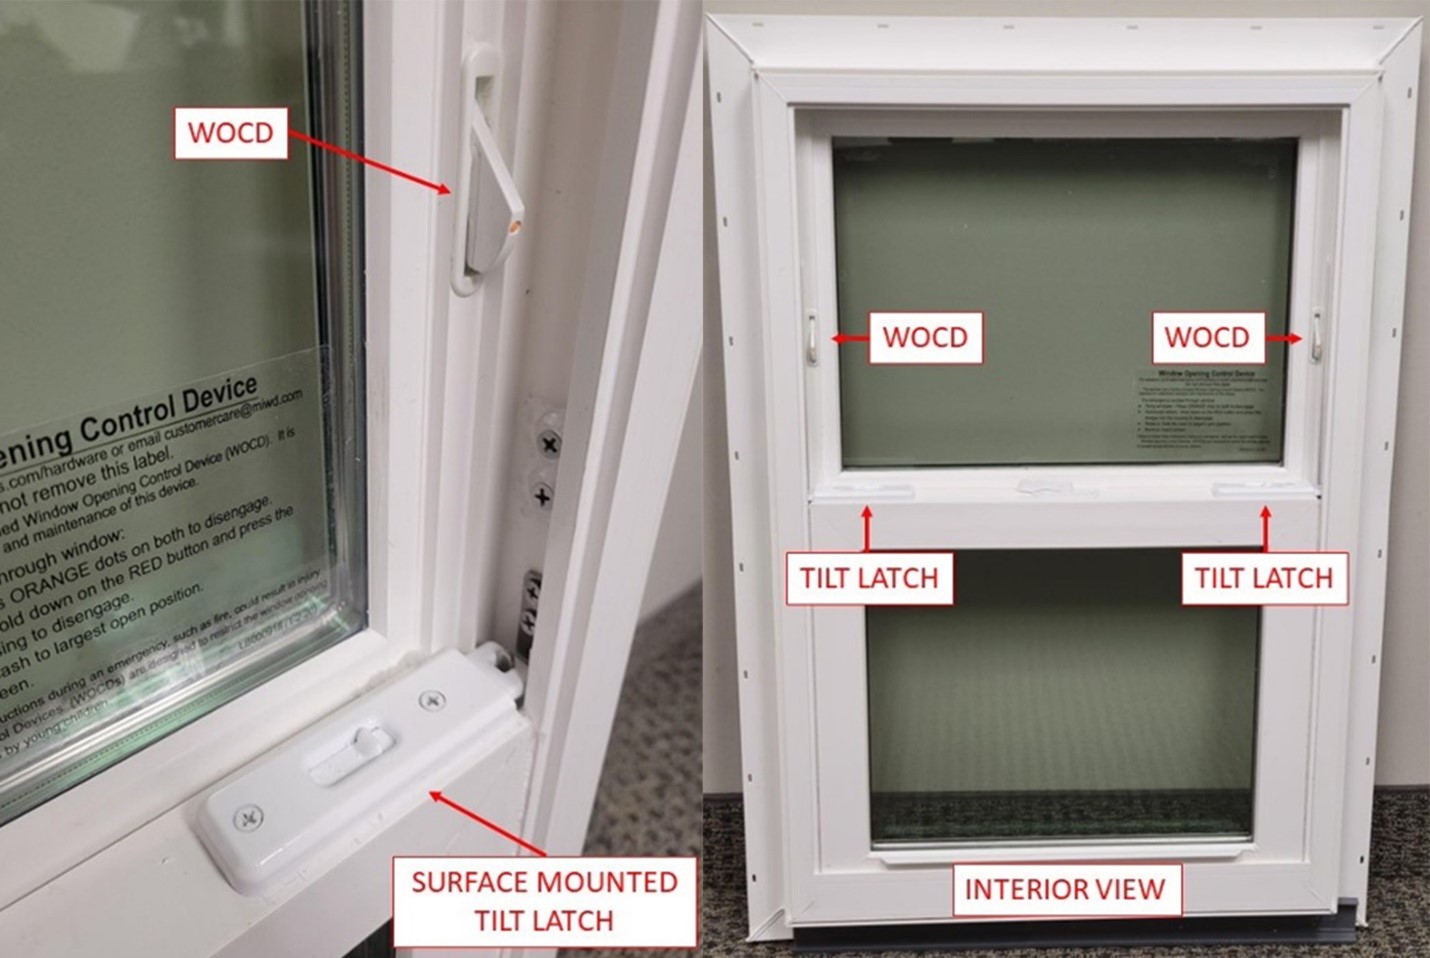 1620 vinyl single-hung impact windows with window opening control devices